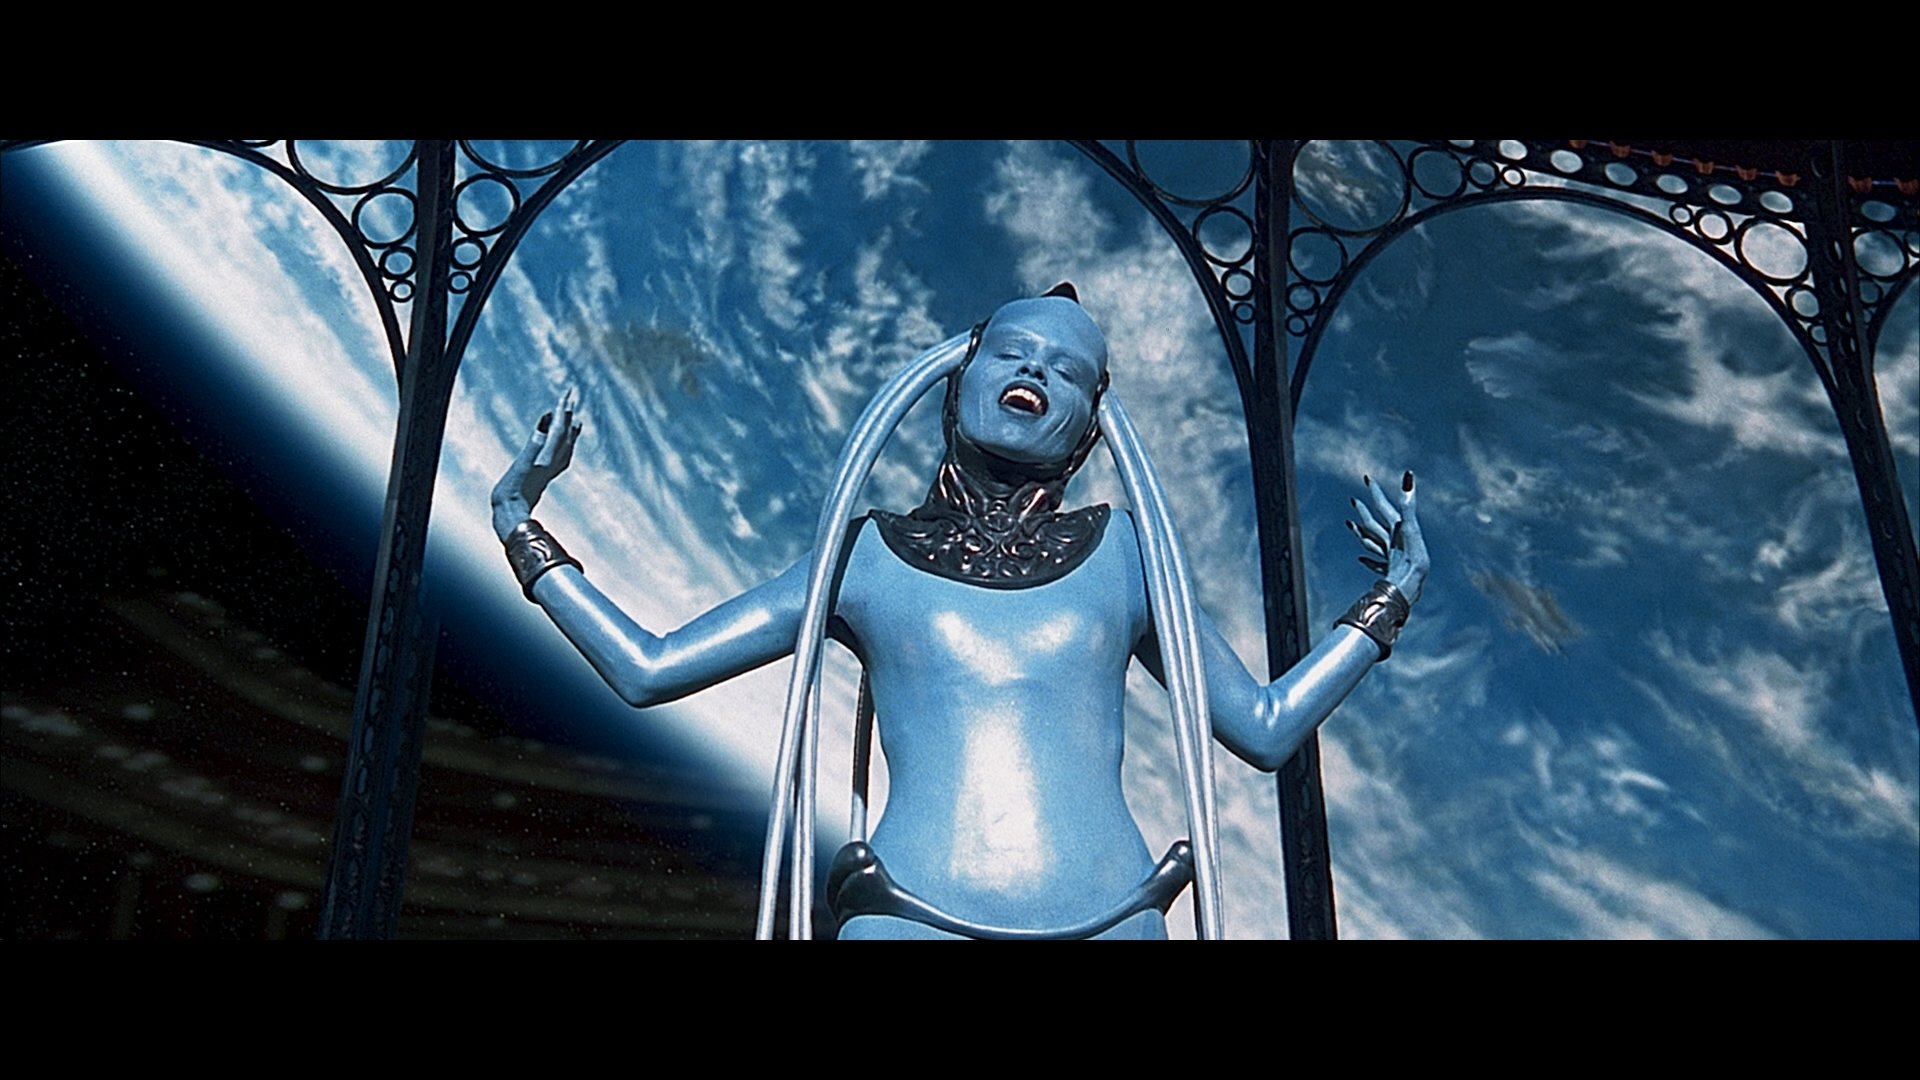 the fifth element full movie free download